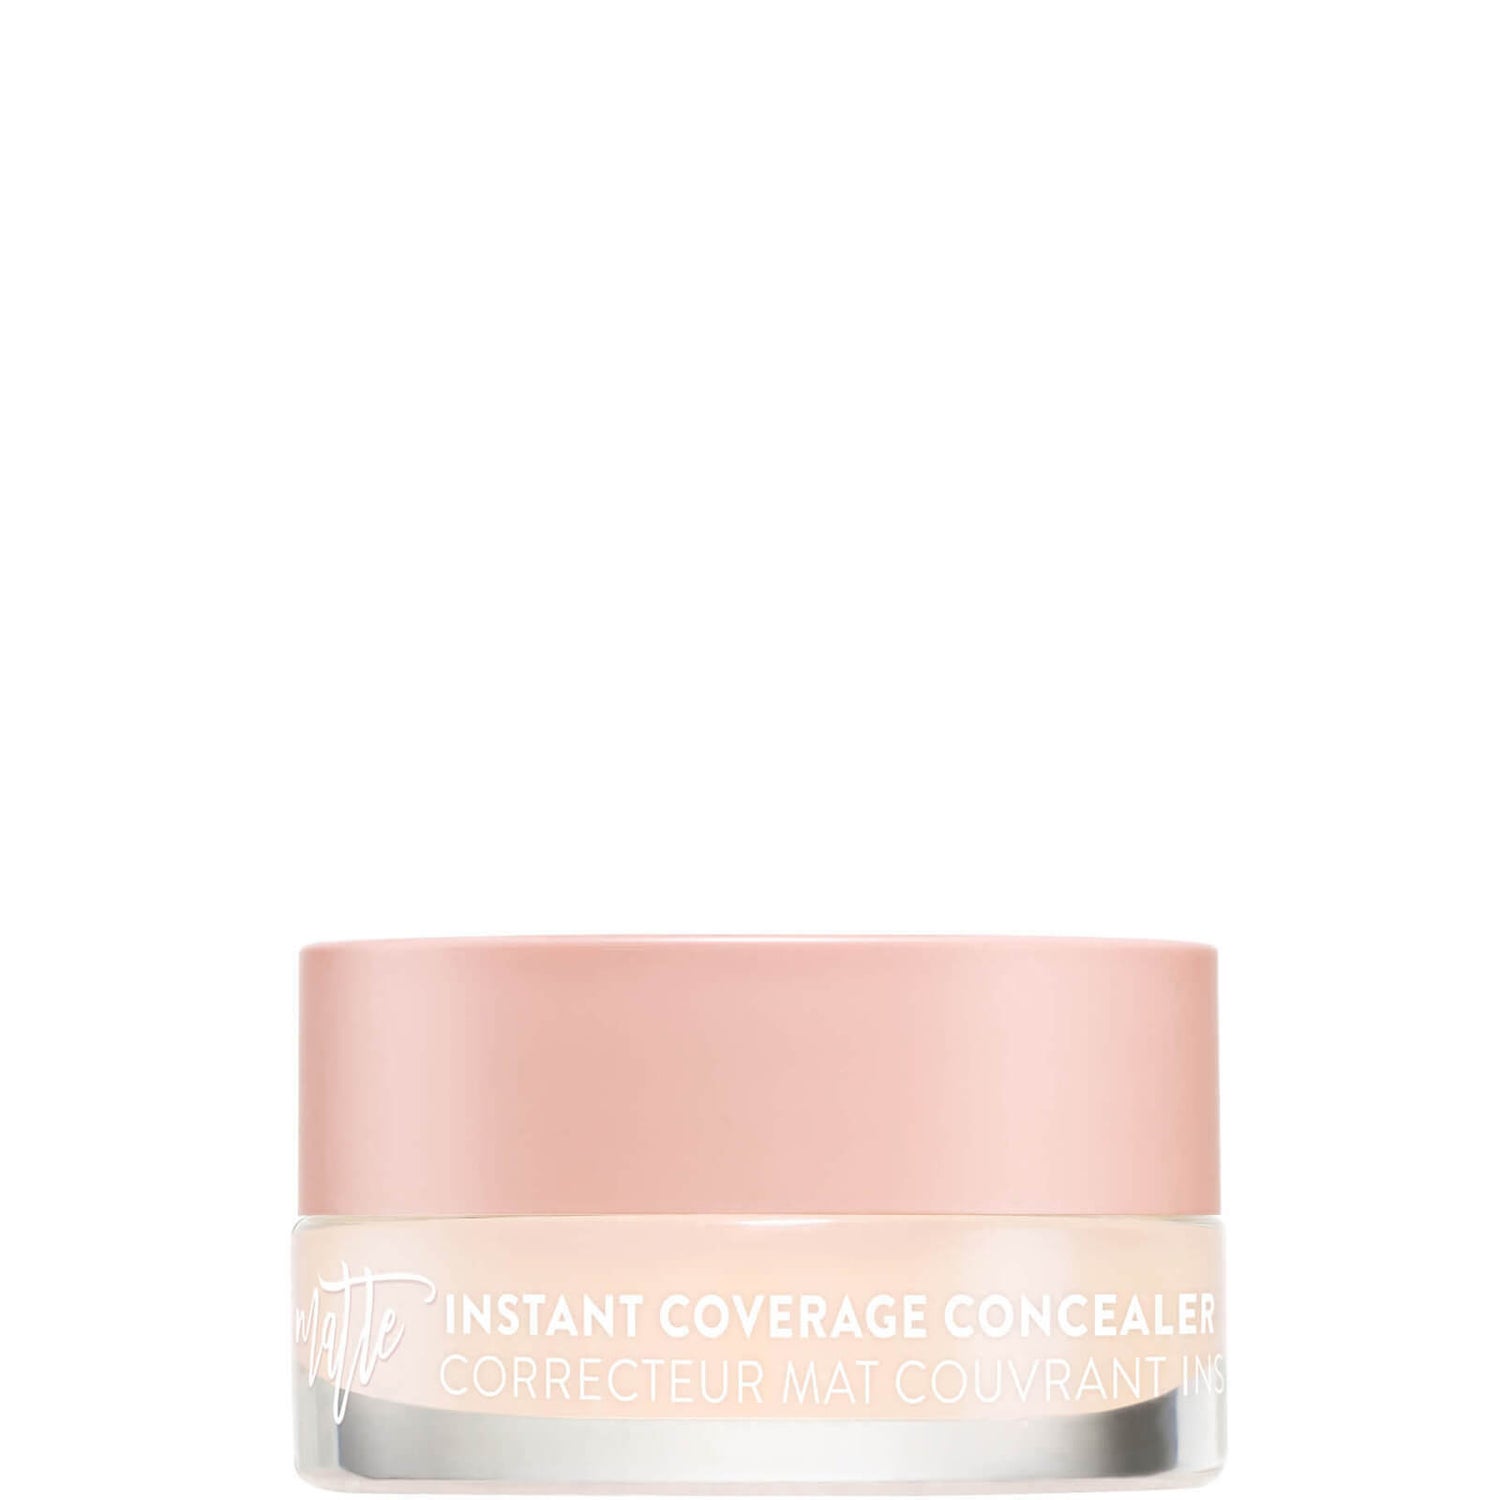 Too Faced Peach Perfect Instant Coverage Concealer 7g (Various Shades)